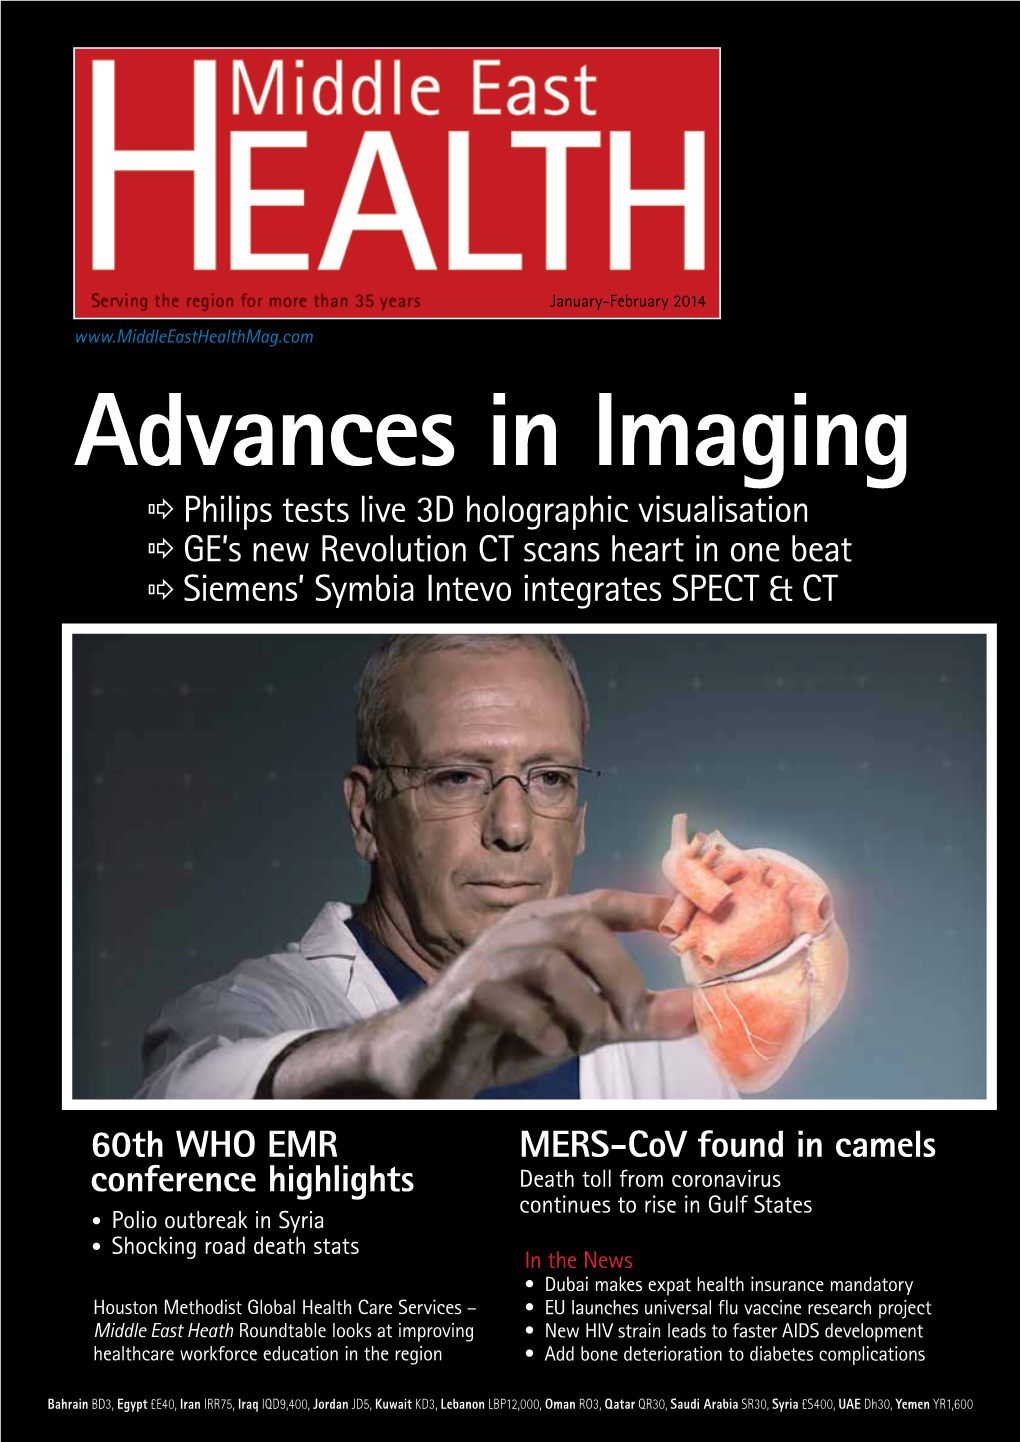 Advances in Imaging X Philips Tests Live 3D Holographic Visualisation X GE’S New Revolution CT Scans Heart in One Beat X Siemens’ Symbia Intevo Integrates SPECT & CT